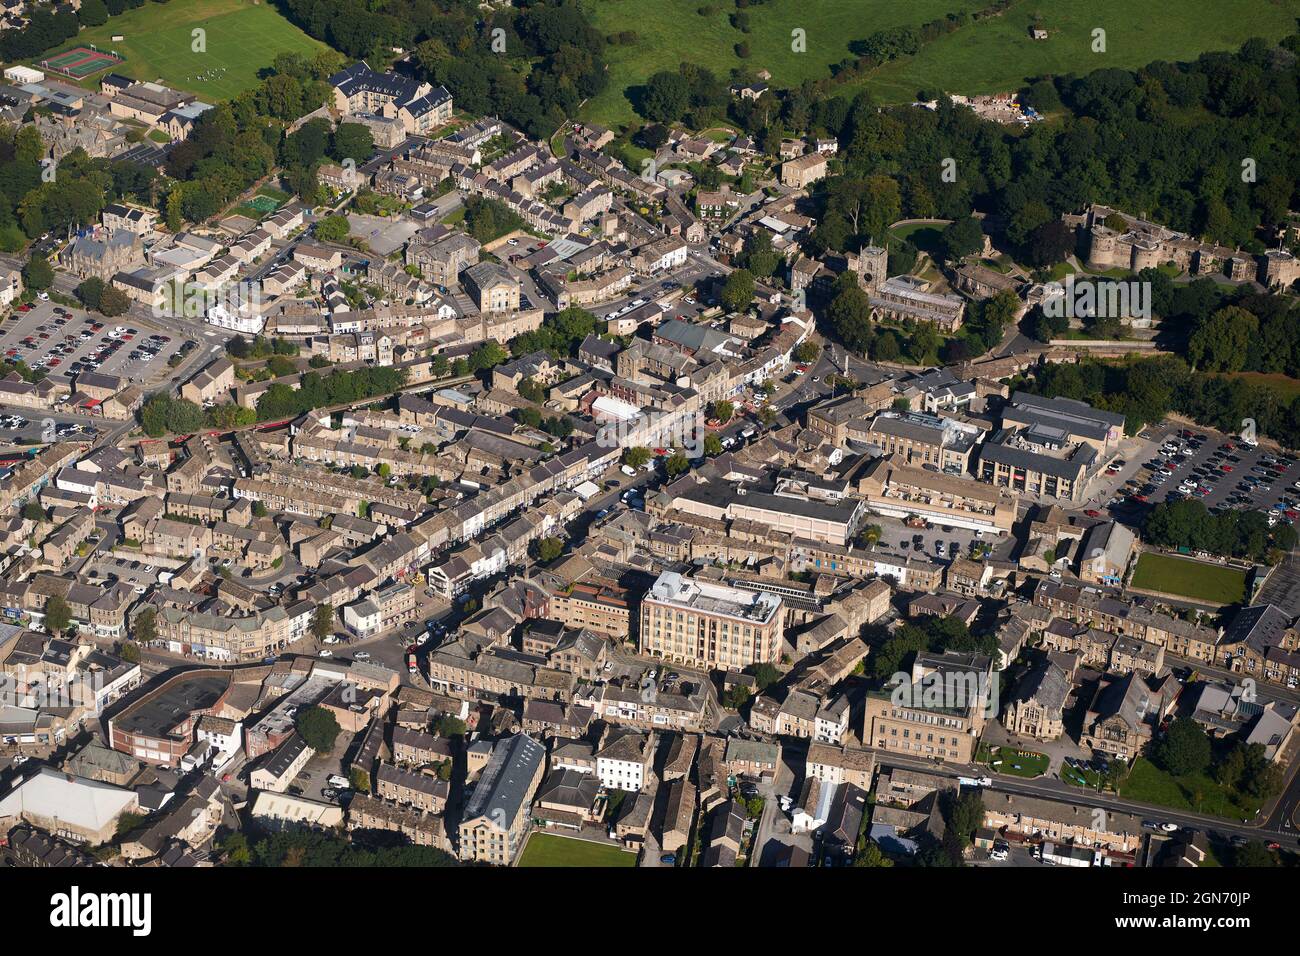 An aerial view of the market town and regional centre, of Skipton, North Yorkshire, Northern England, UK showing the high street and town centre Stock Photo